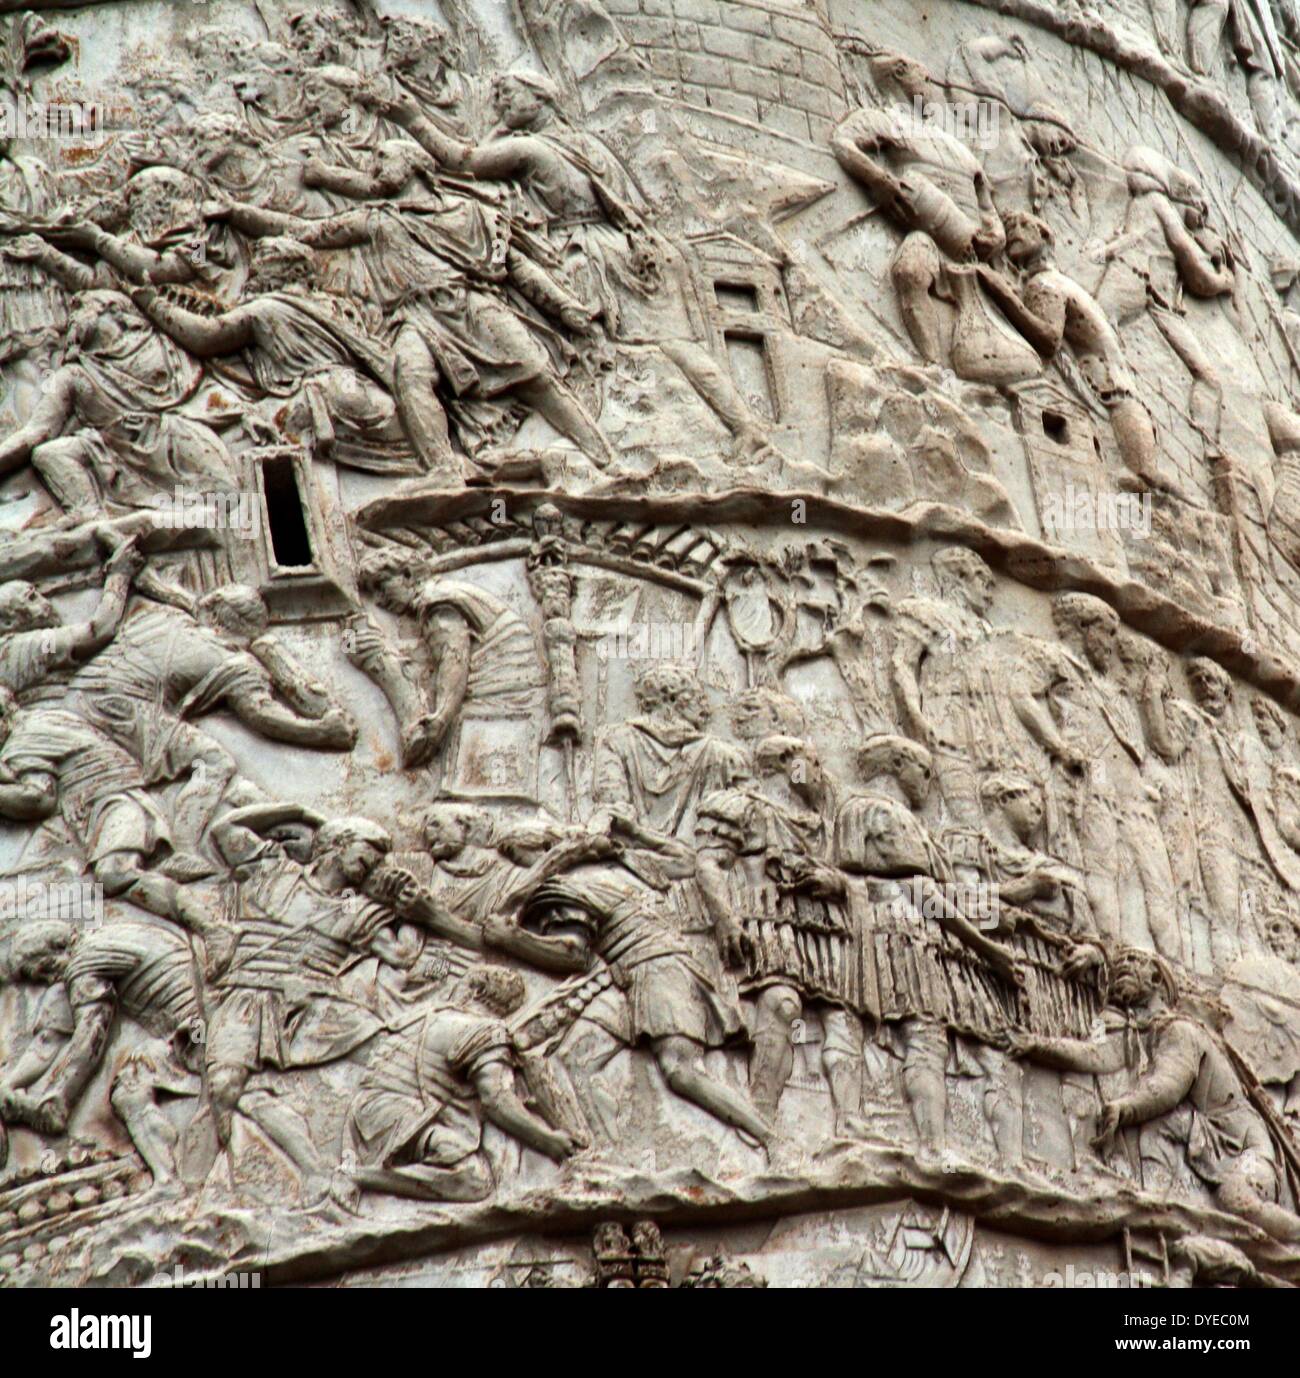 Trajan's Column is a Roman column commemorating the Roman Emperor Trajan's victory in the Dacian Wars. Located in Trajan's Forum, north of the Roman Forum. The spiral Bas Relief artistically describes the epic battles between the Romans and Dacians. Completed in 113 AD. Rome. Italy 2013 Stock Photo